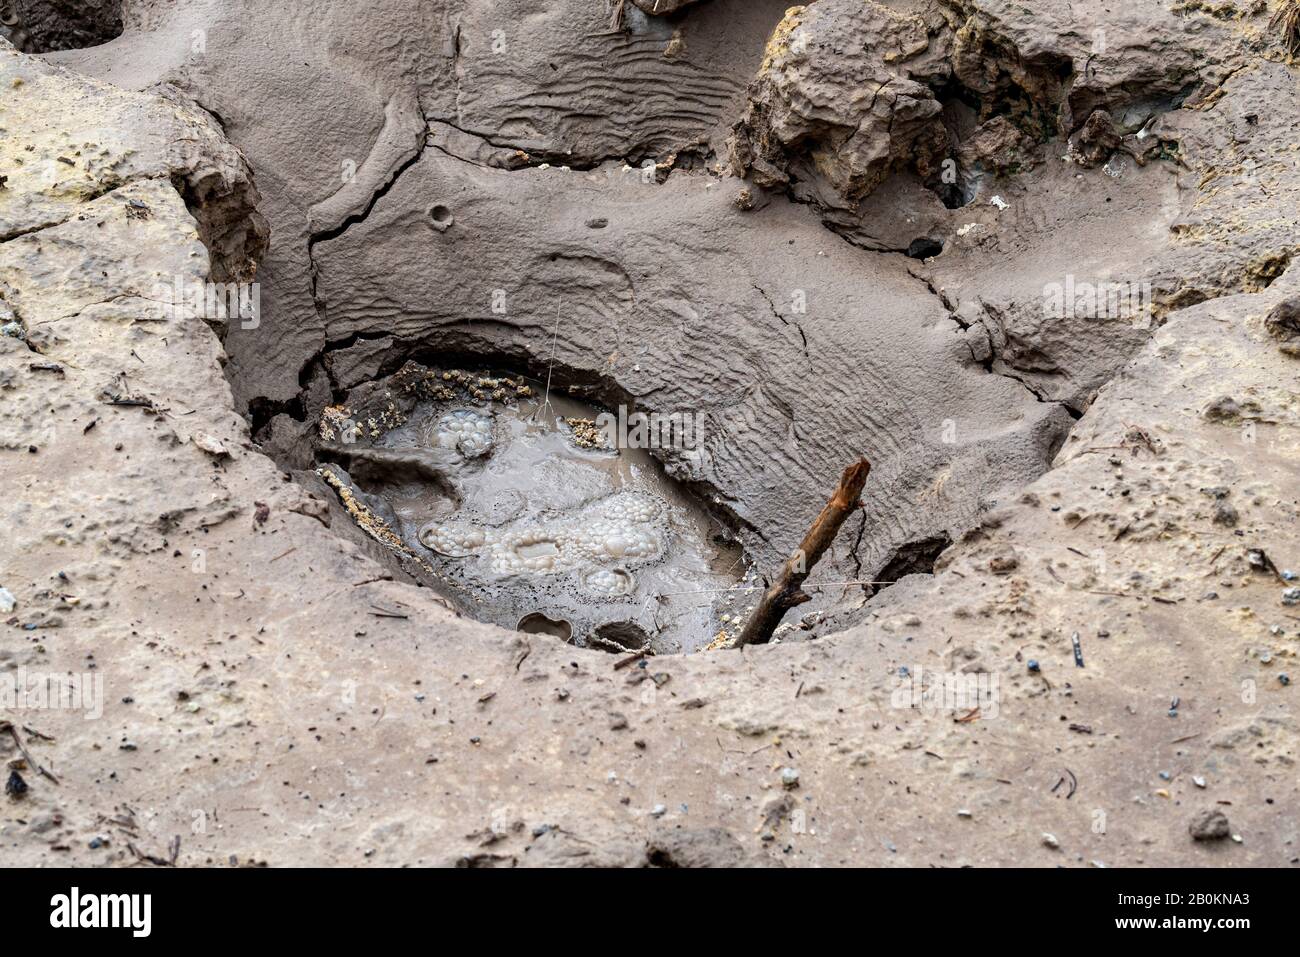 Bubbling mud pot, hole in ground. Stock Photo